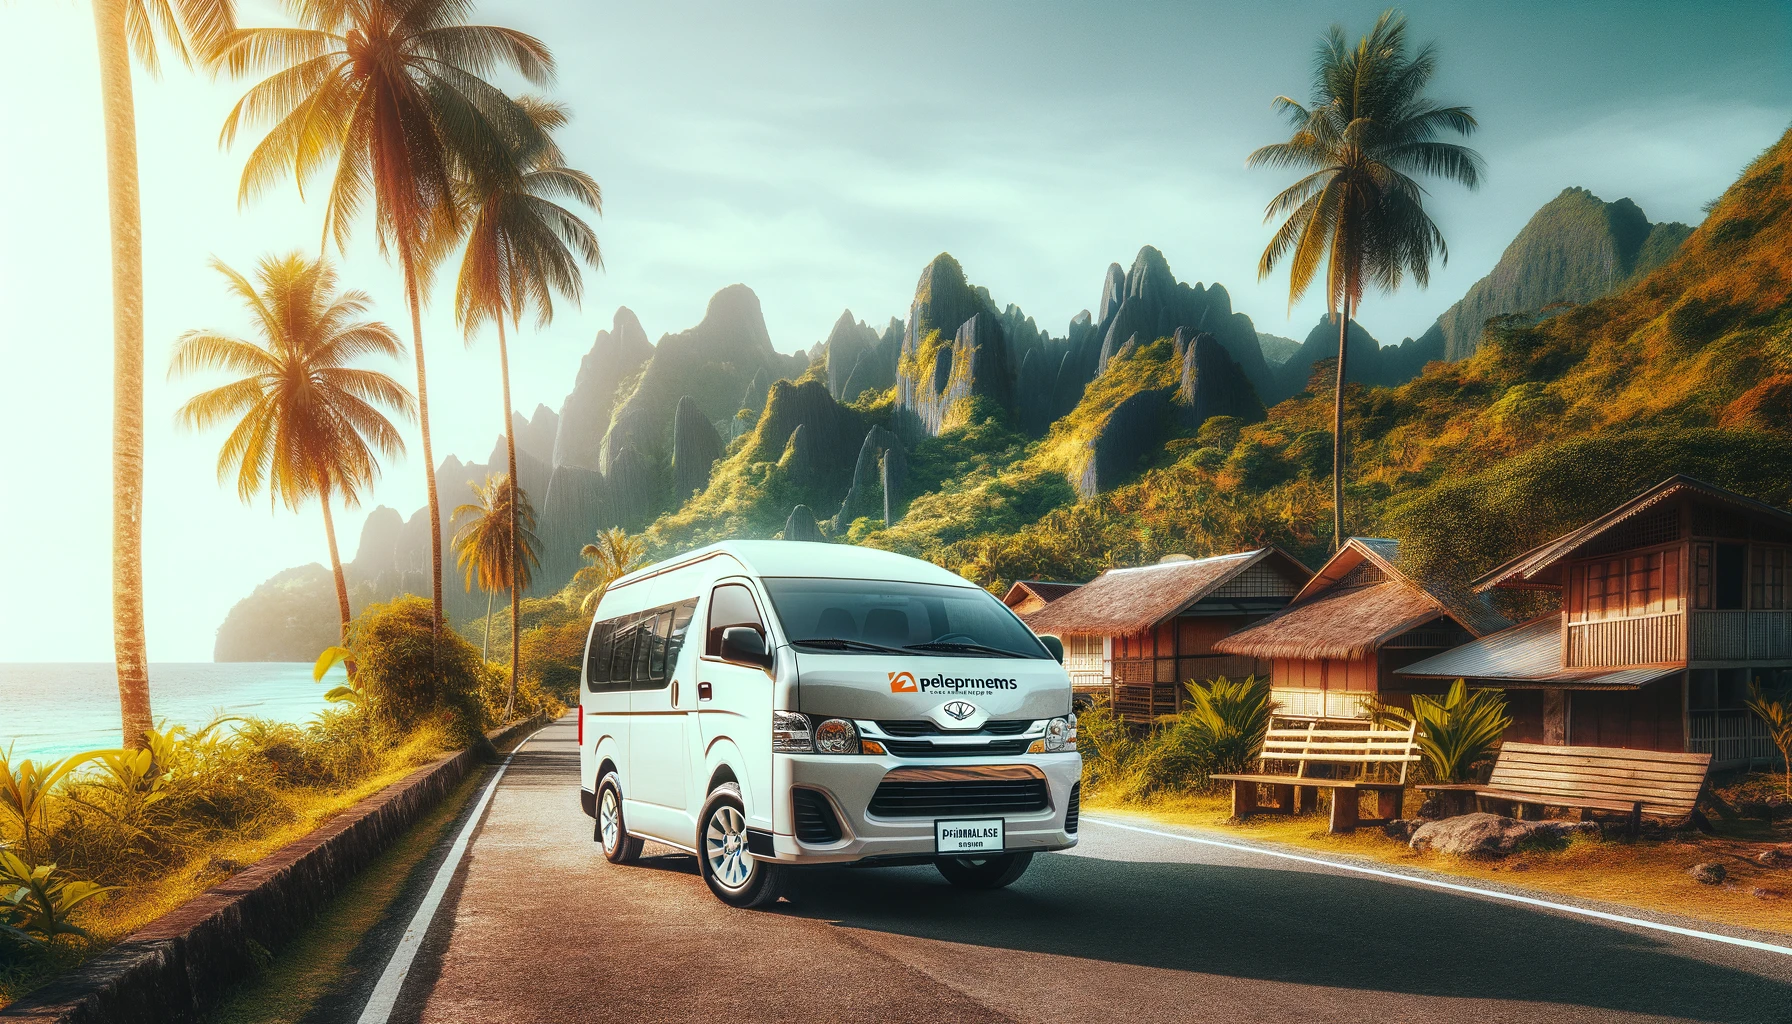 The van is strategically positioned in front of iconic landmarks of Puerto Princesa, Palawan